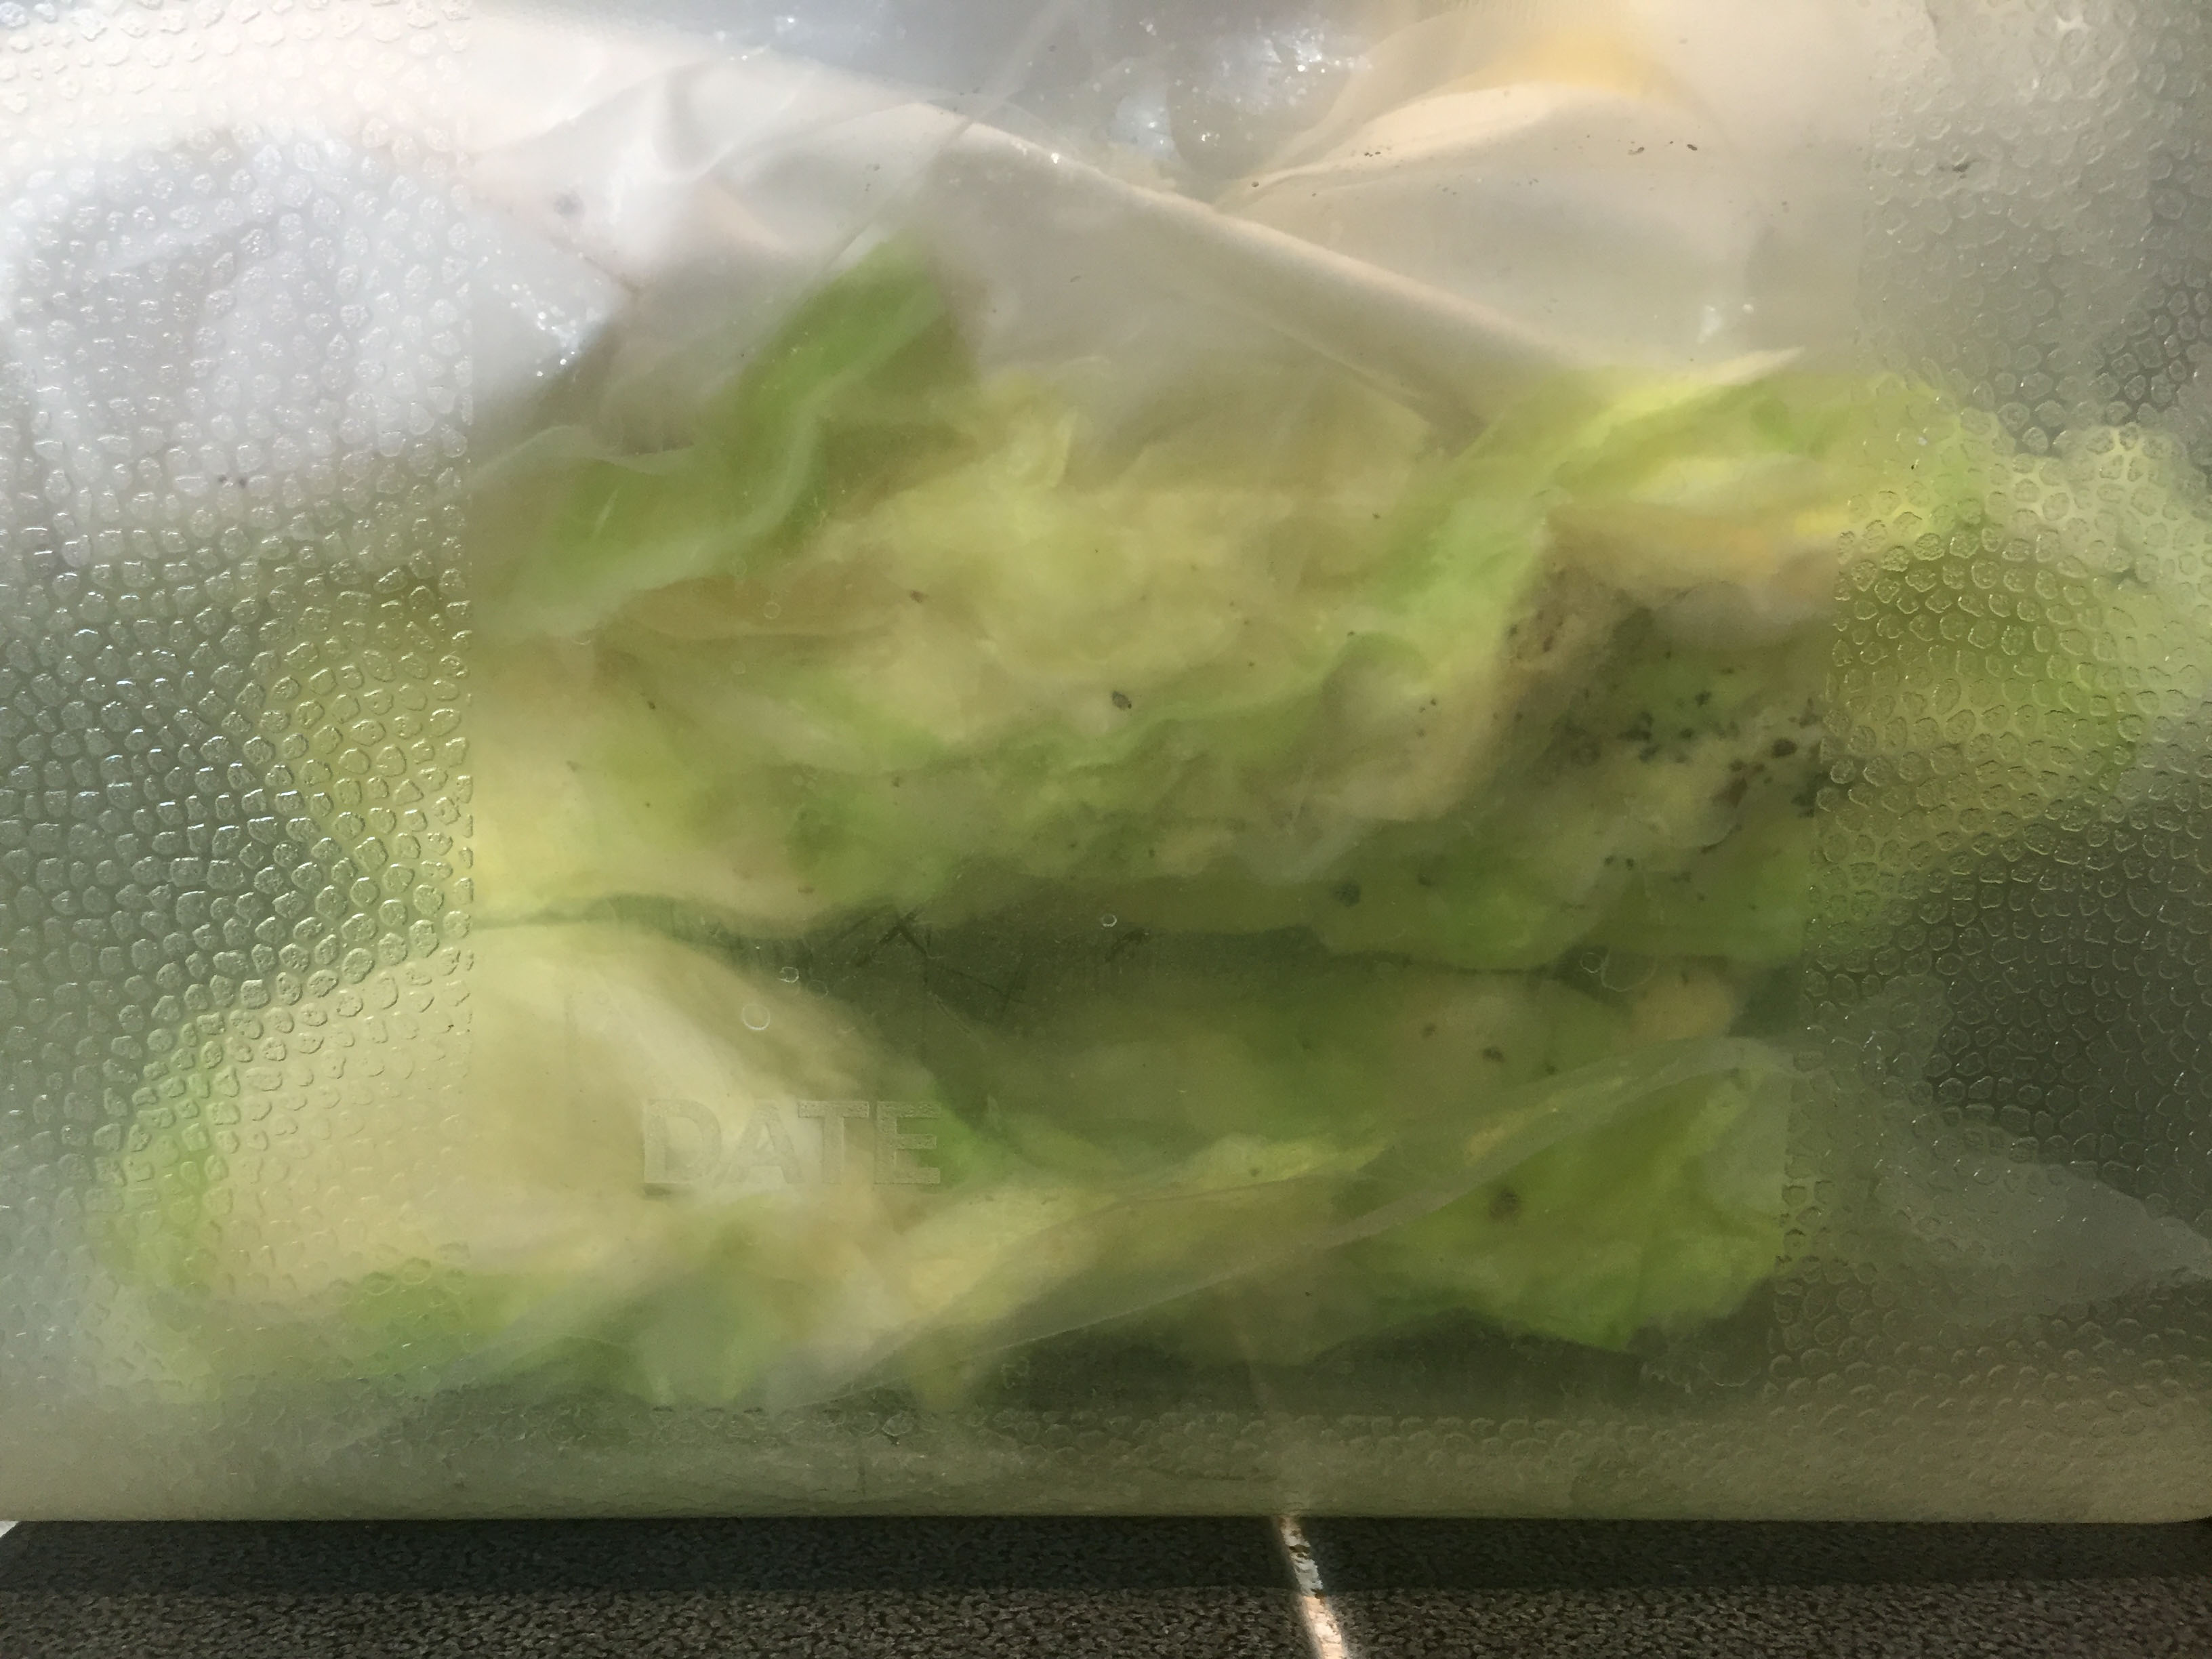 cabbage in sous vide water bath